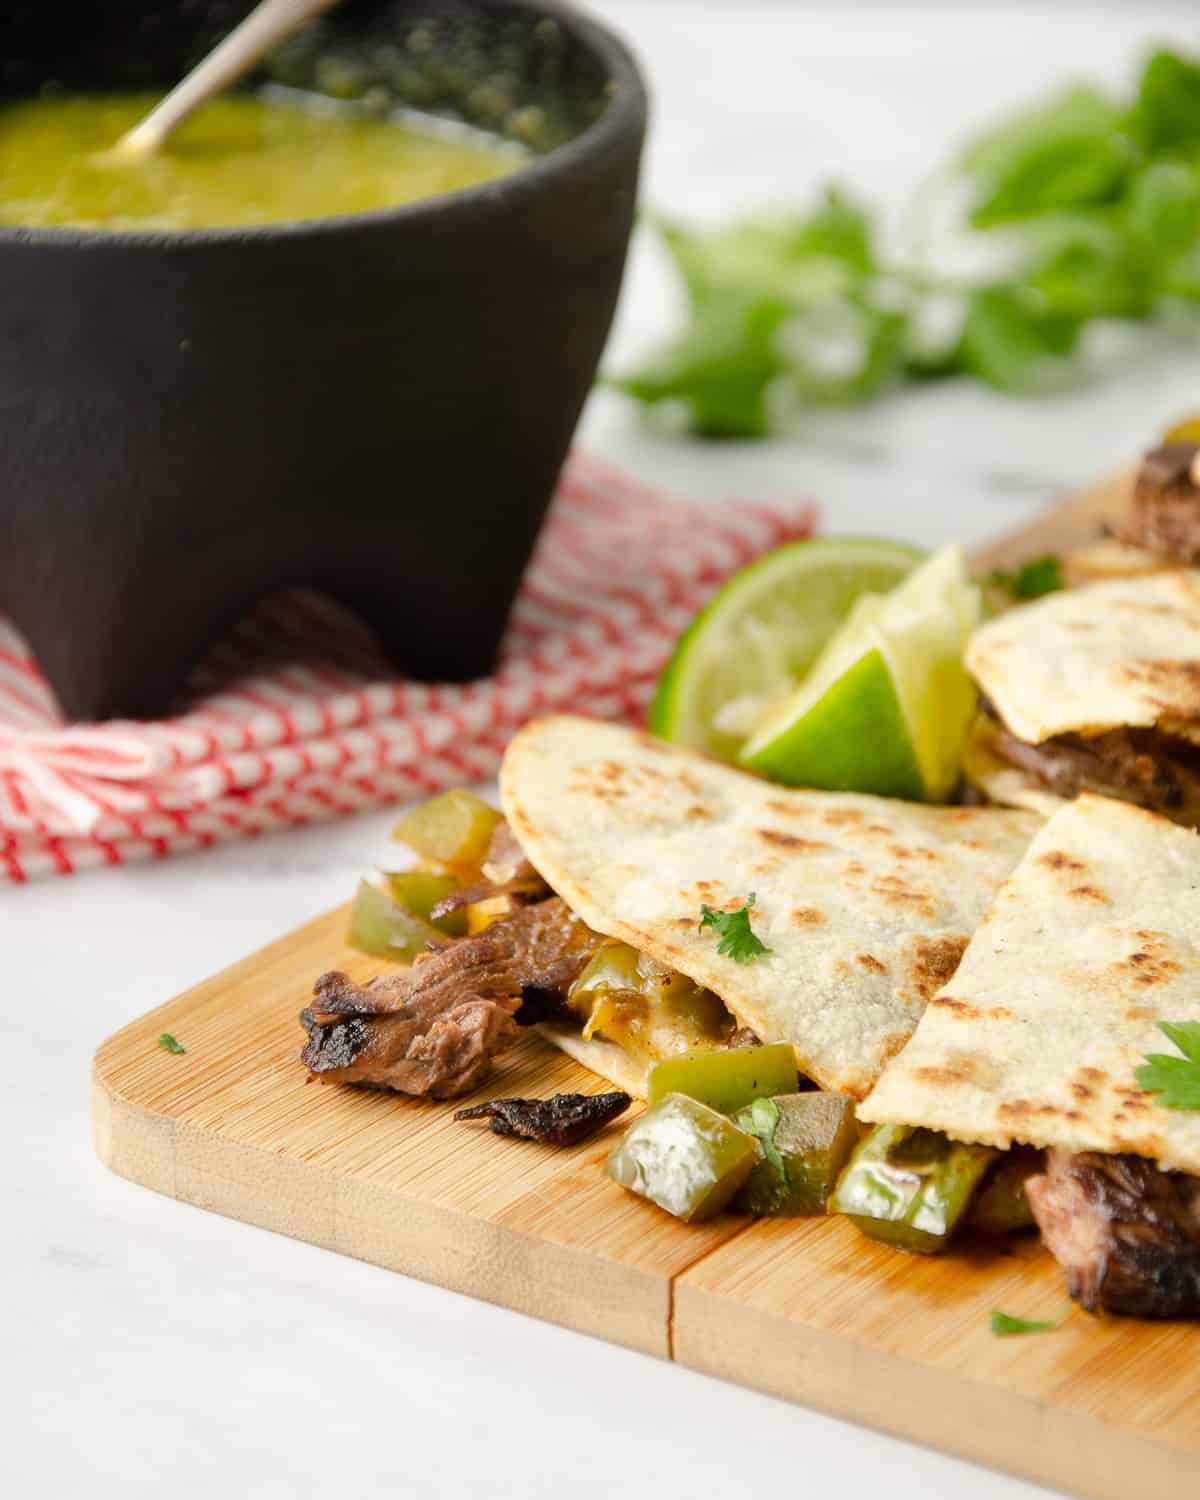 A close up view of the carne asada inside a cooked quesadilla.